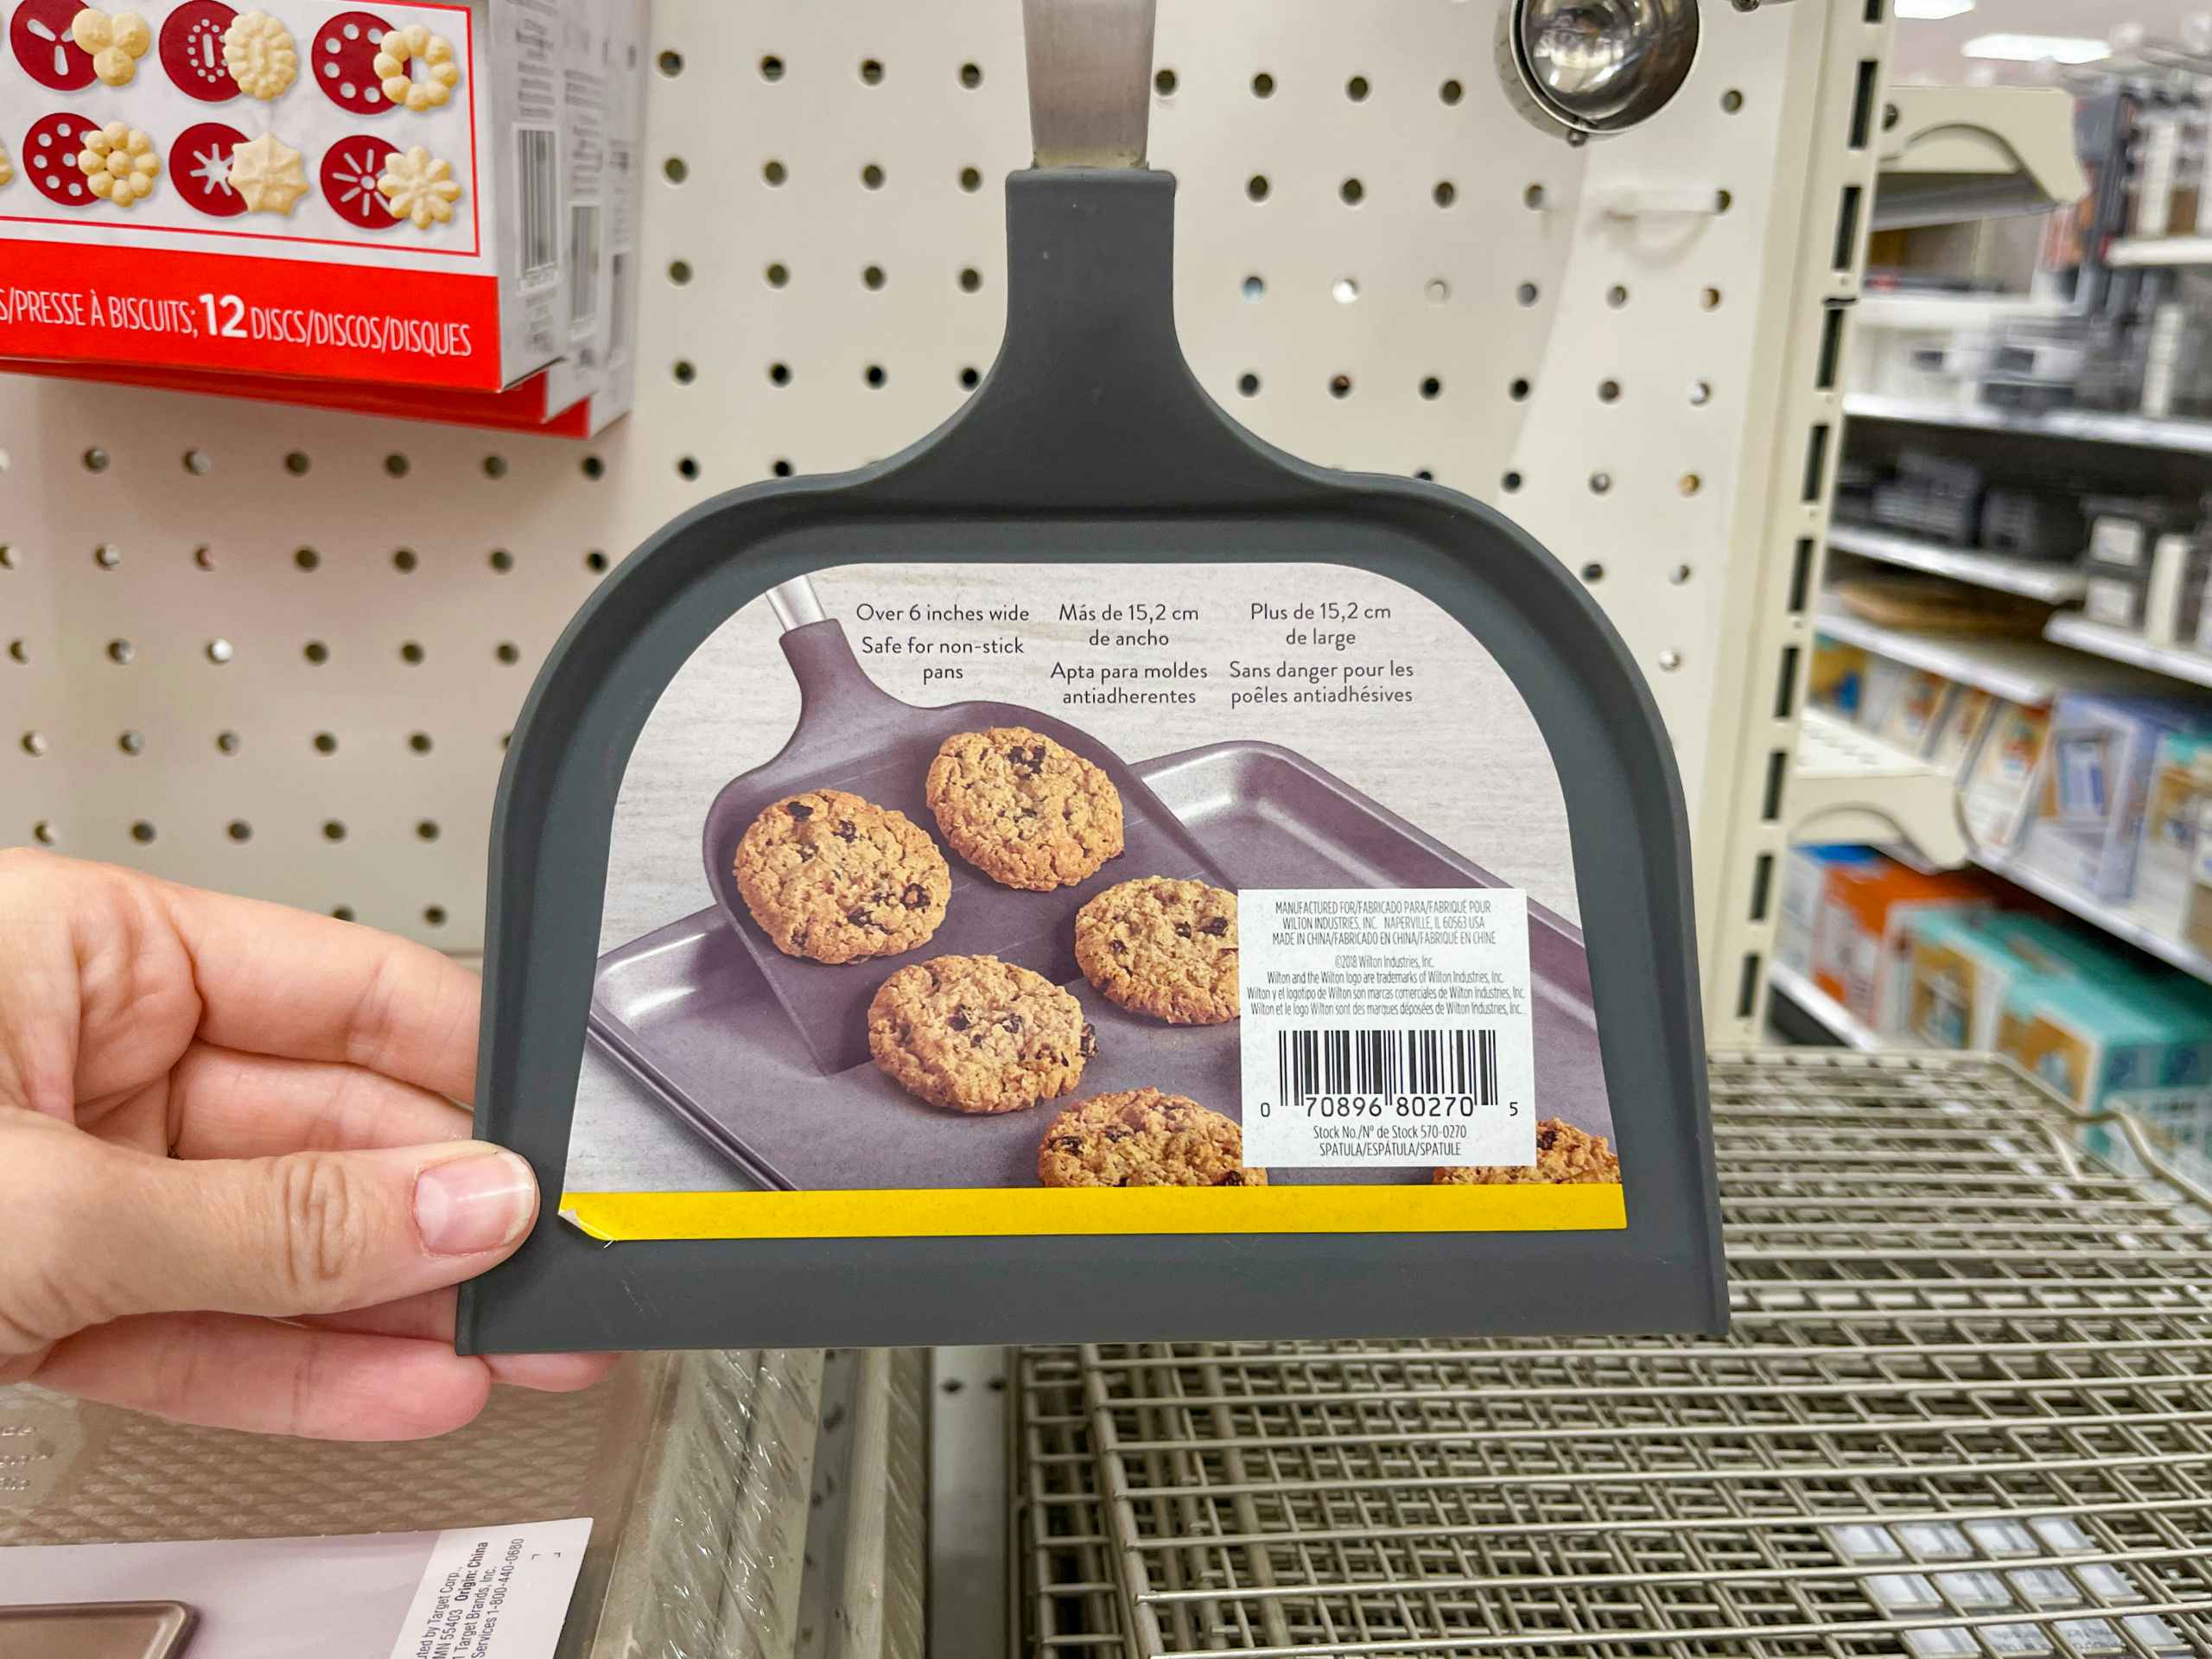 A Wilton Big Cookie Spatula held out by hand while it's hanging from a rack.